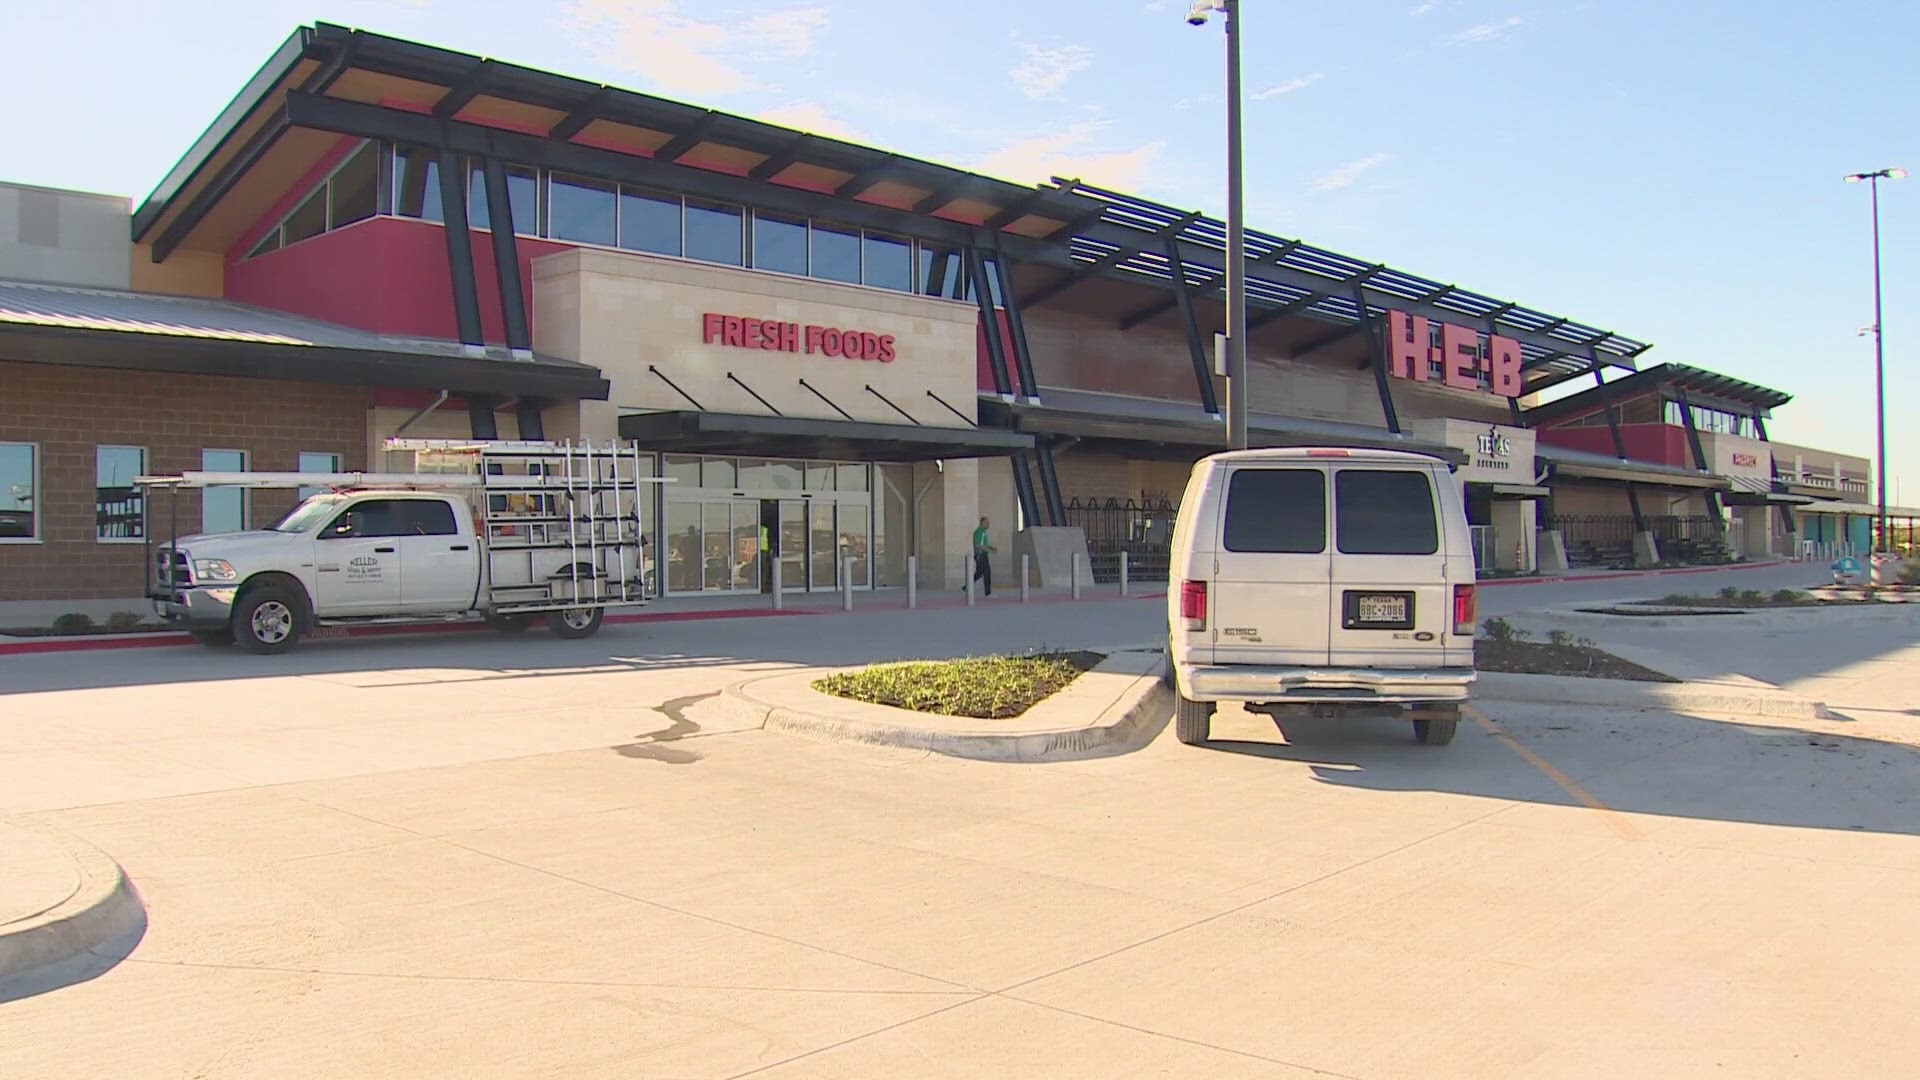 The city confirmed Friday that H-E-B, the renowned regional supermarket chain, has plans to build a new store within The Villages at Gateway development.